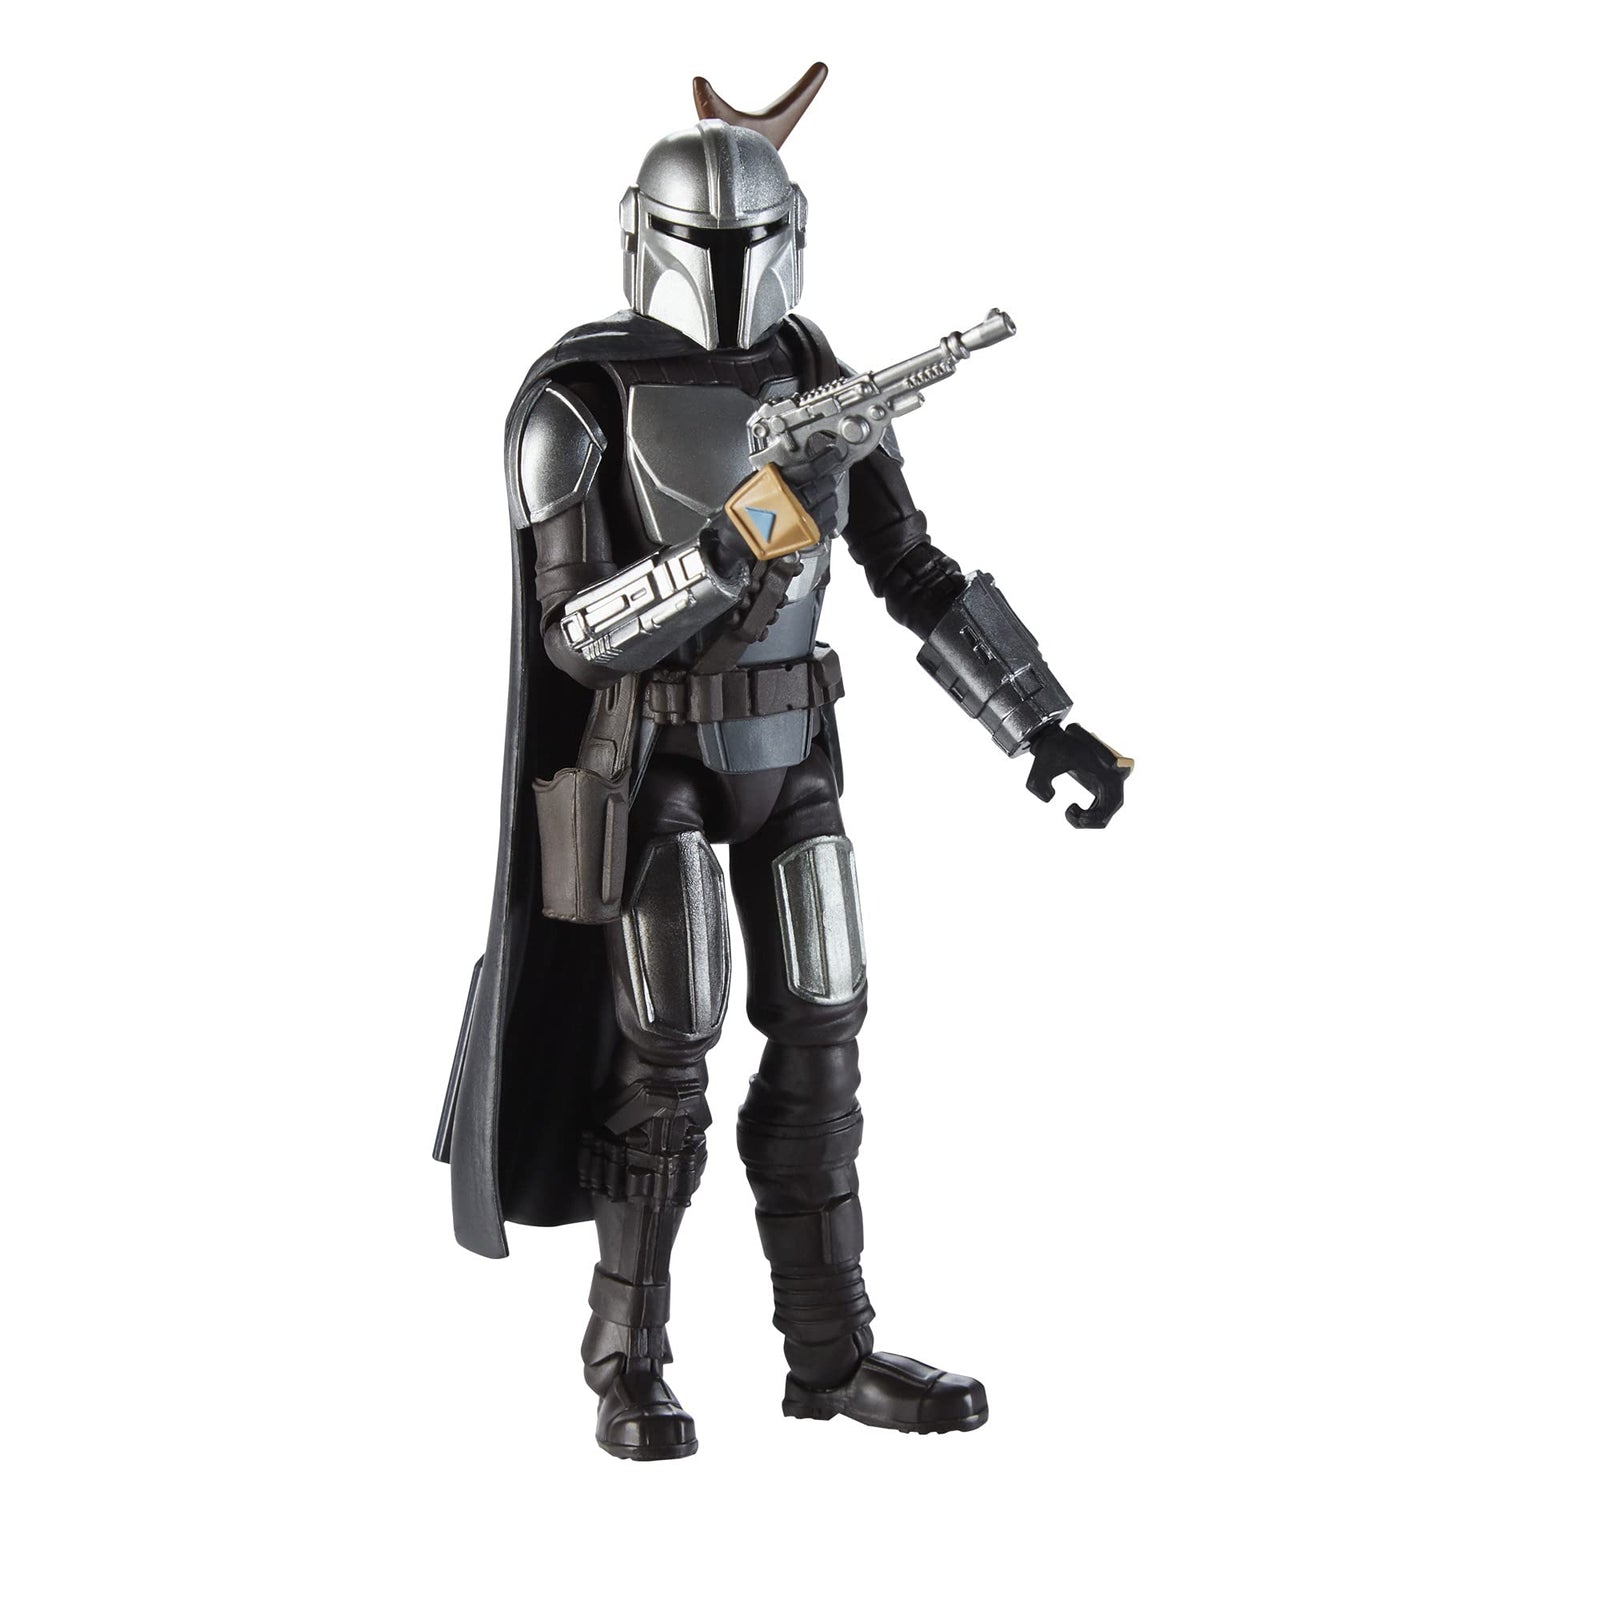 Star Wars Galaxy of Adventures The Mandalorian 5-Inch-Scale Figure 2 Pack with Fun Blaster Accessories, Toys for Kids Ages 4 and Up (Amazon Exclusive),F3892